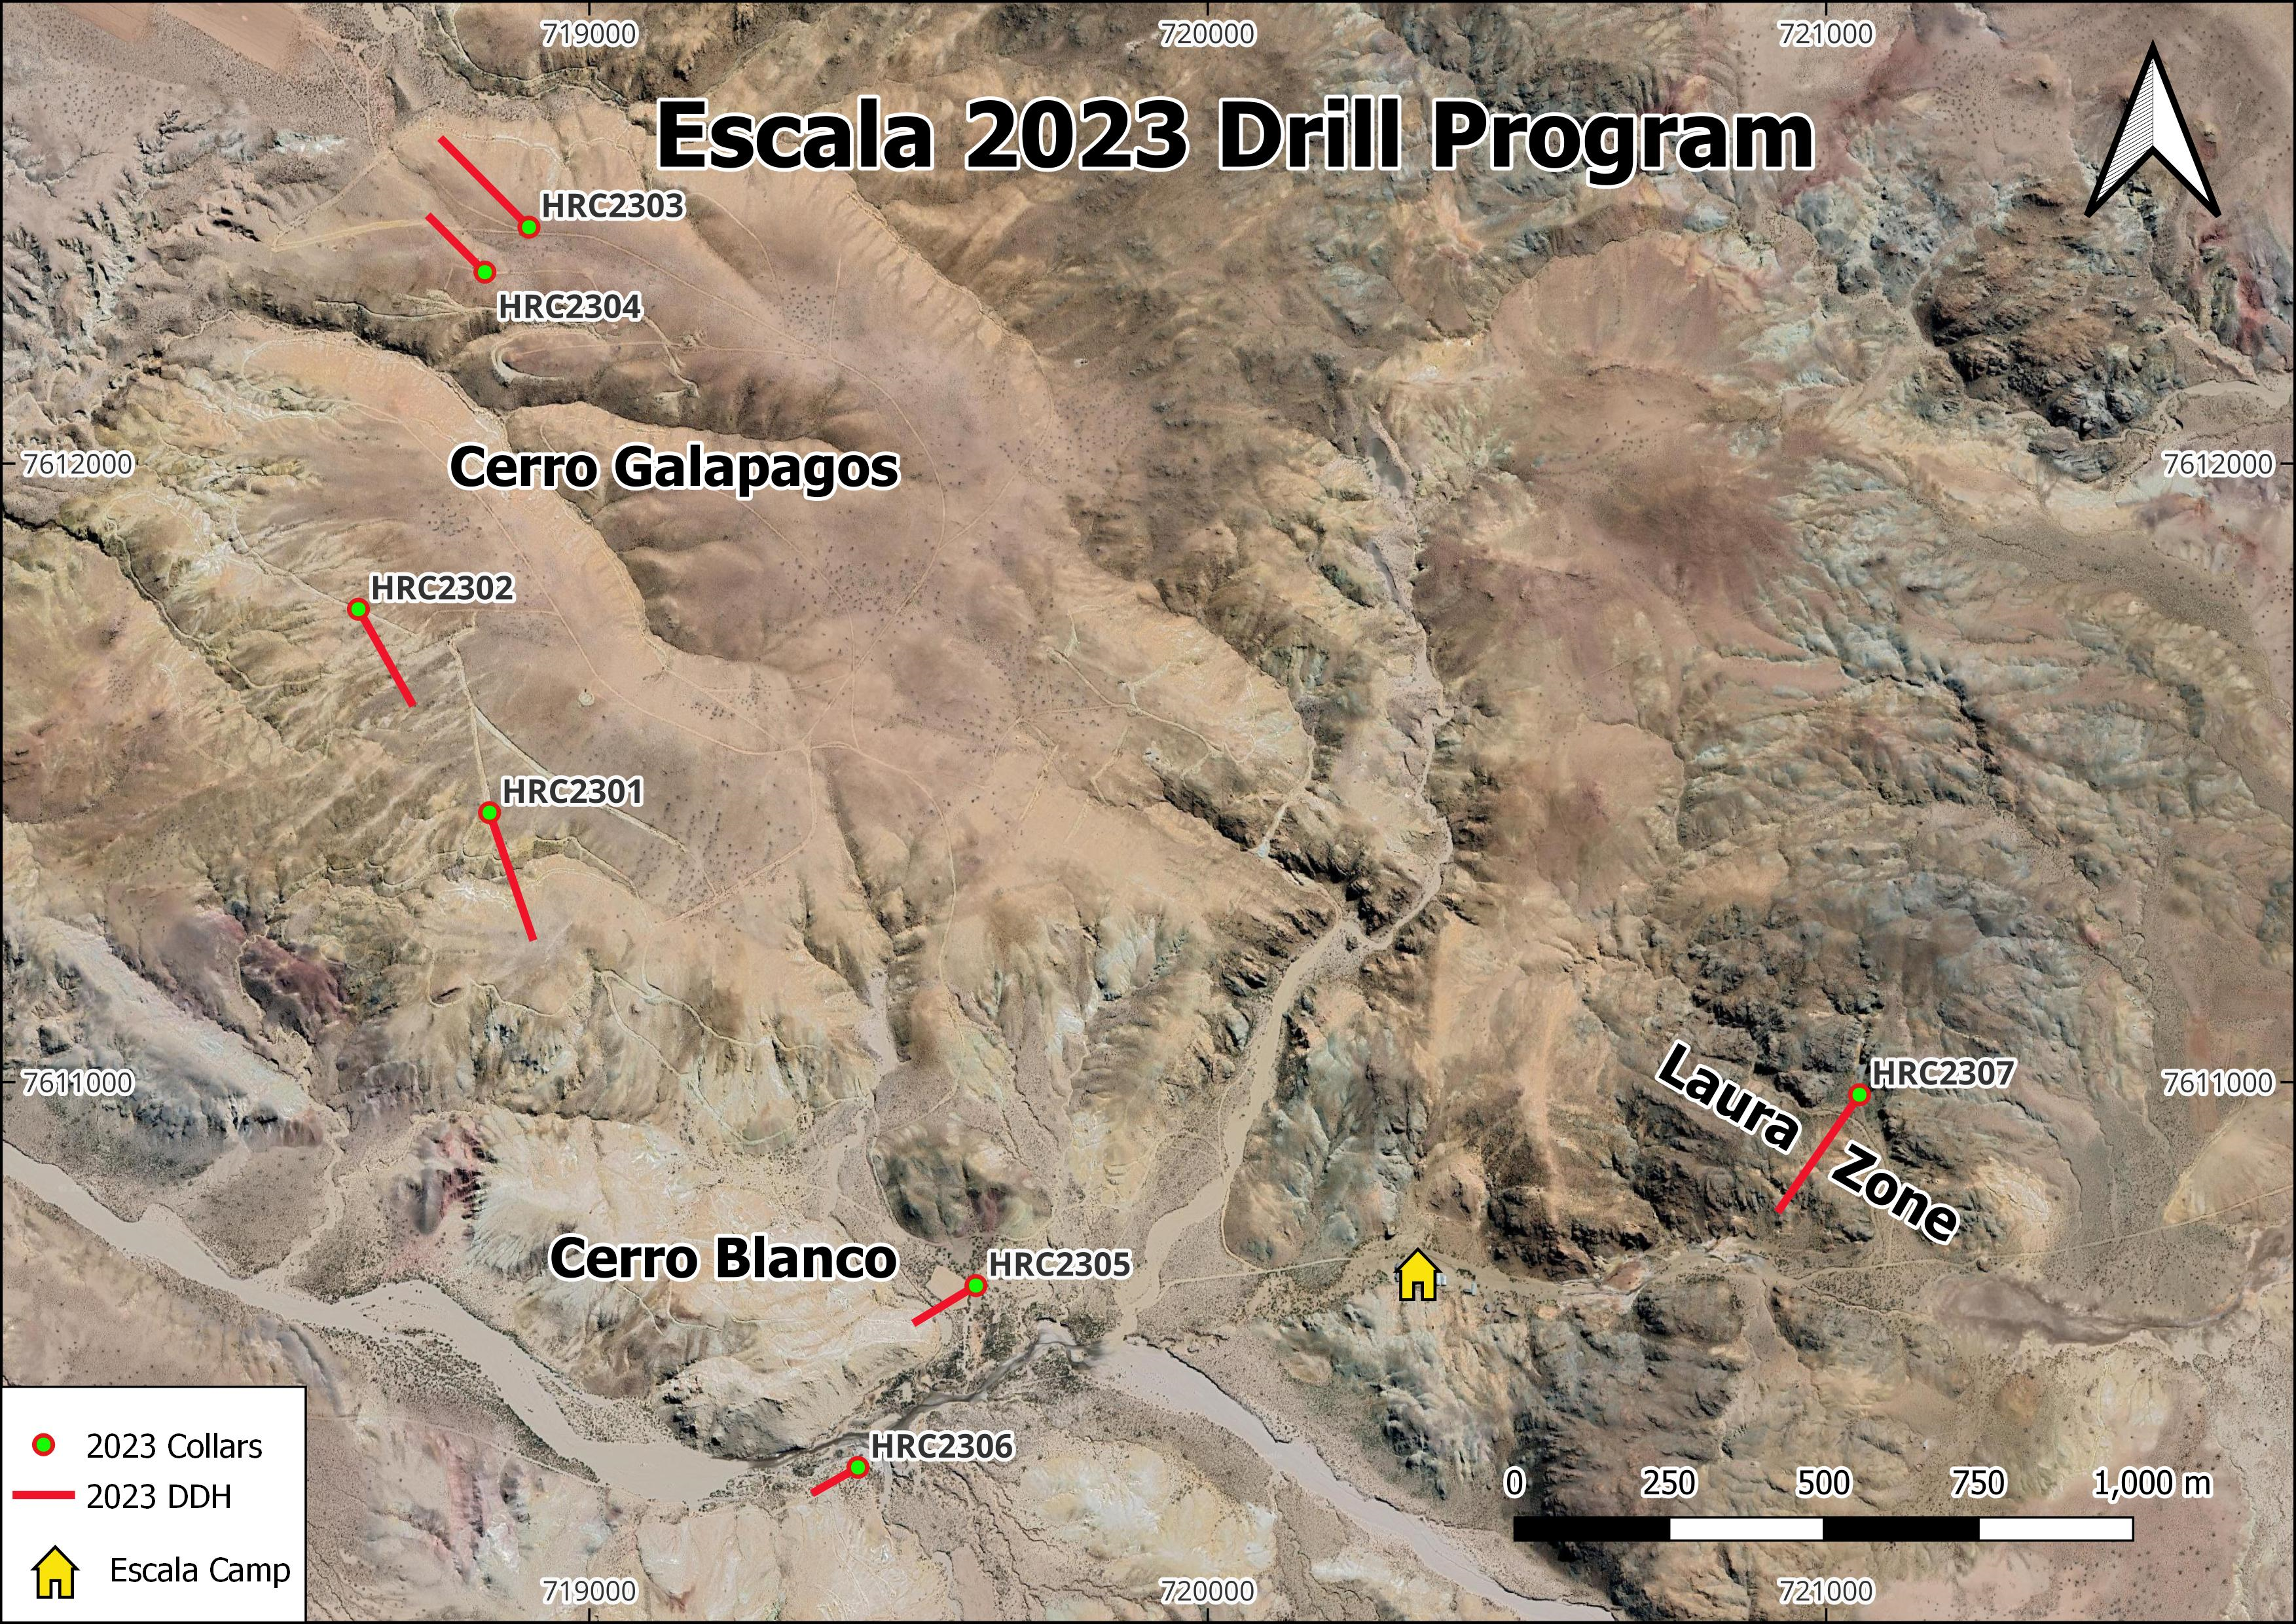 Bocana Resources Corp. Announces Diamond Drill Assay Results from the Escala Gold/Silver/Base Metal Project in Bolivia